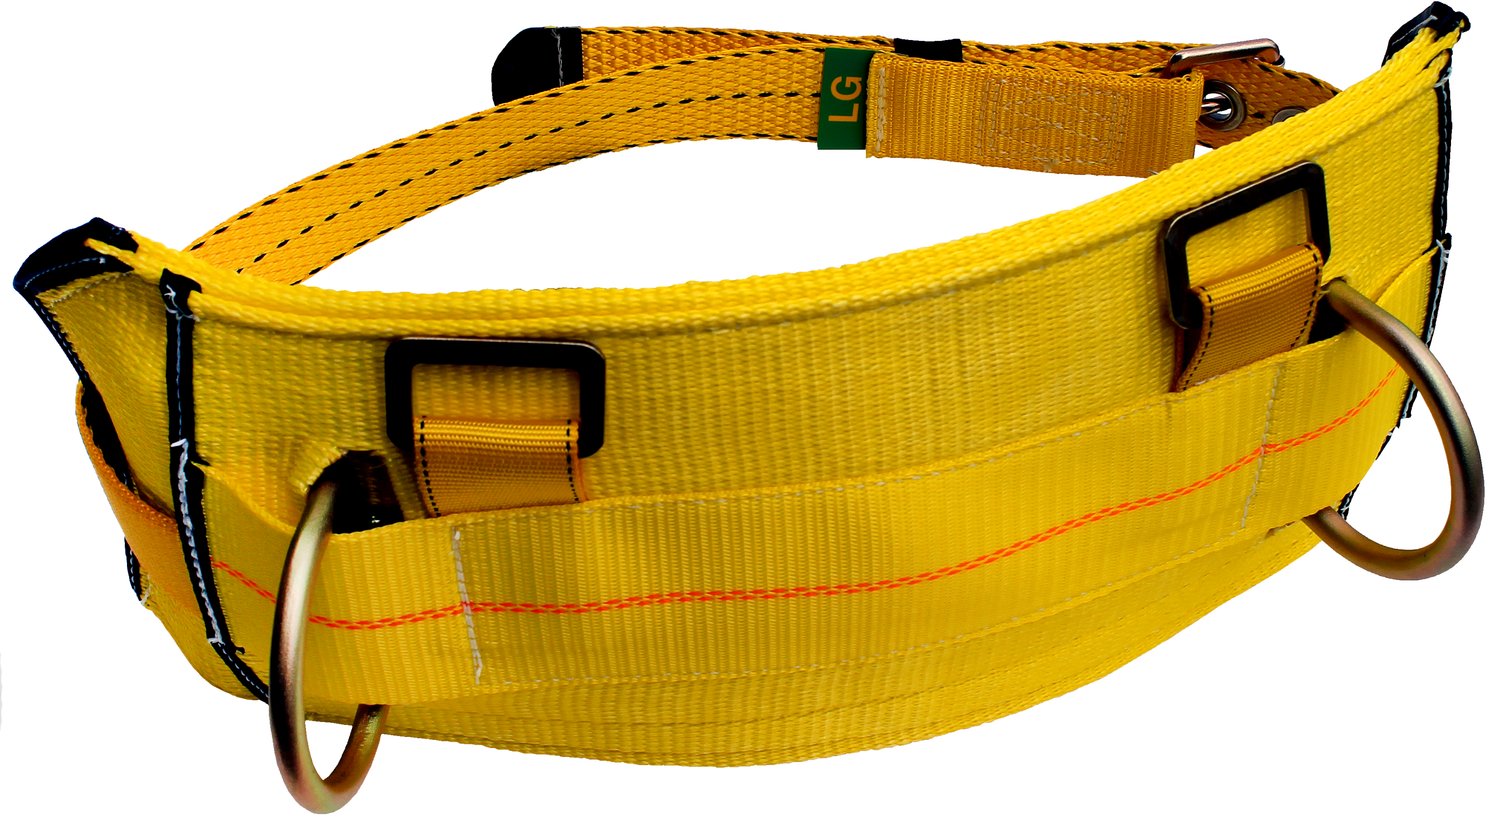 7012814982 - 3M DBI-SALA Derrick Tongue Buckle Positioning Belt with Pass-Thru Harness Connector 1000542, Yellow, Small